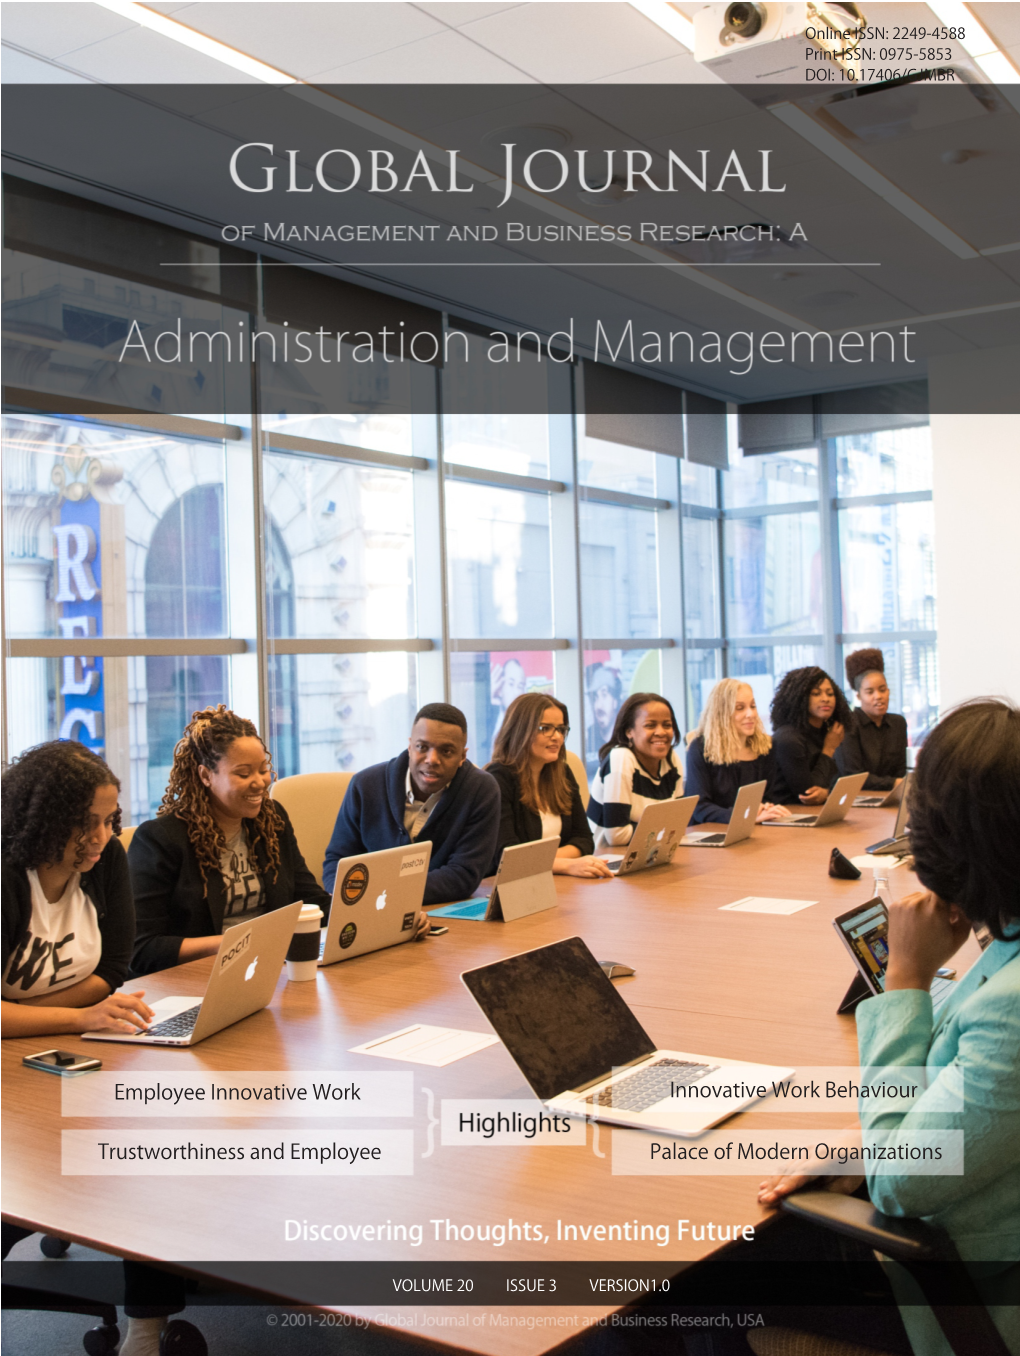 Global Journal of Management and Business Research: a Administration and Management